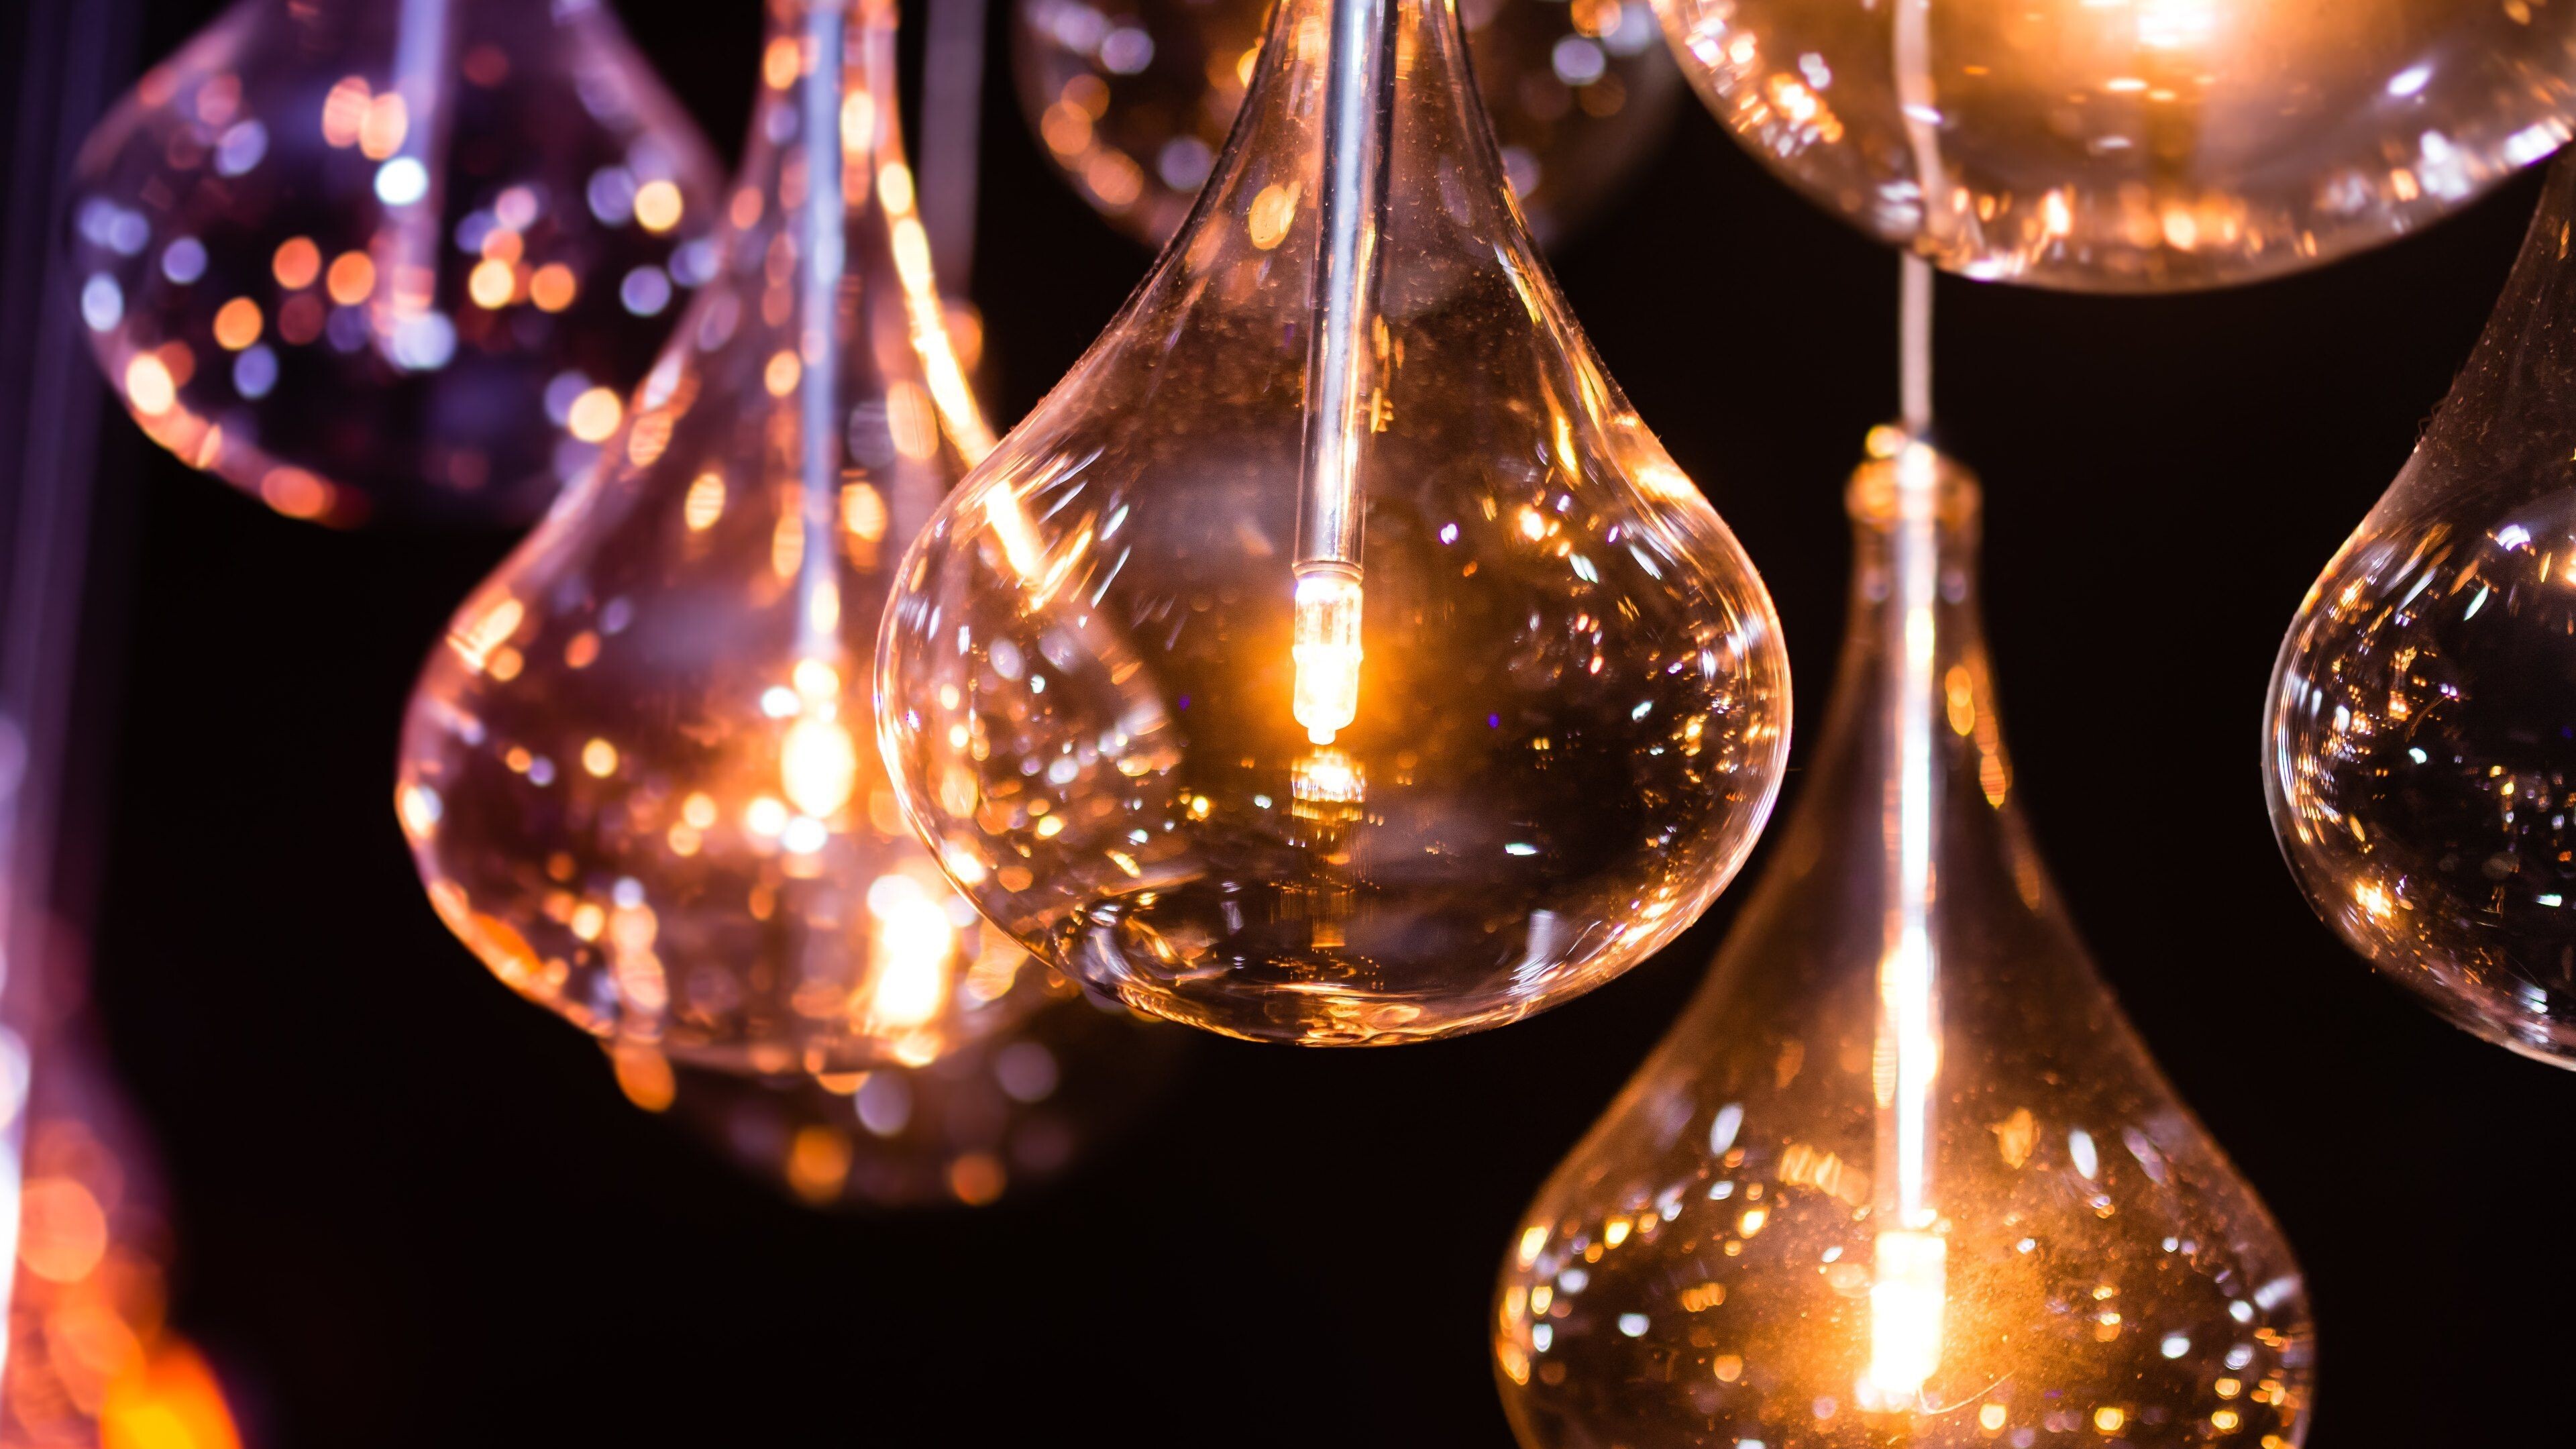 Gold Lights: Party ornaments, Decorative vintage Edison bulbs, The clear glass bulb, Retro styling. 3840x2160 4K Background.